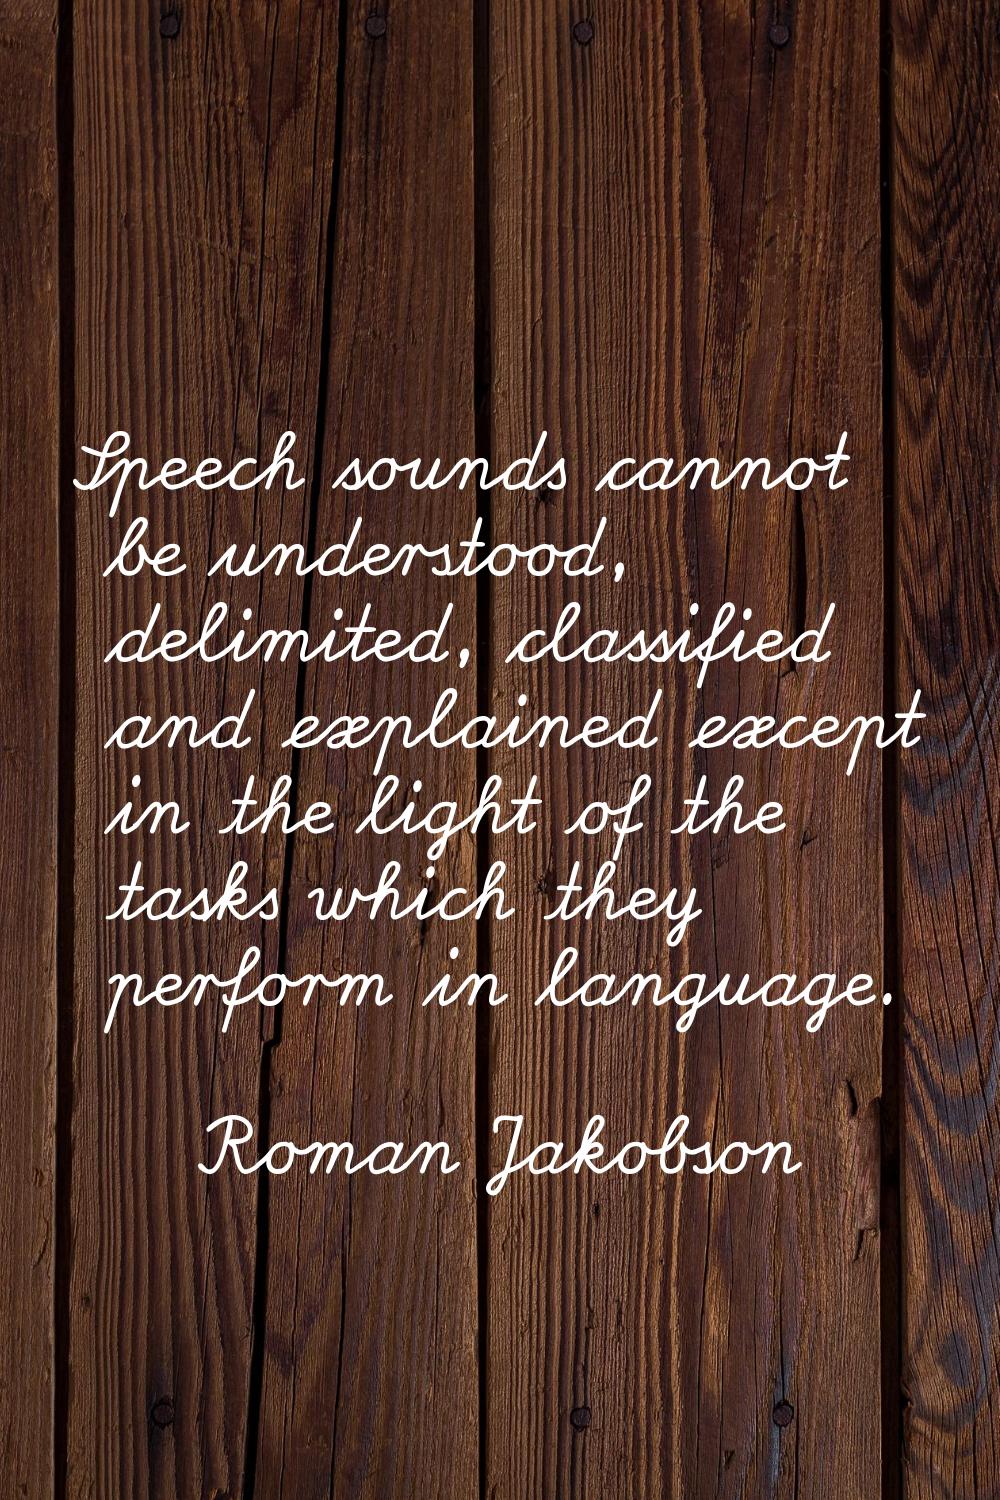 Speech sounds cannot be understood, delimited, classified and explained except in the light of the 